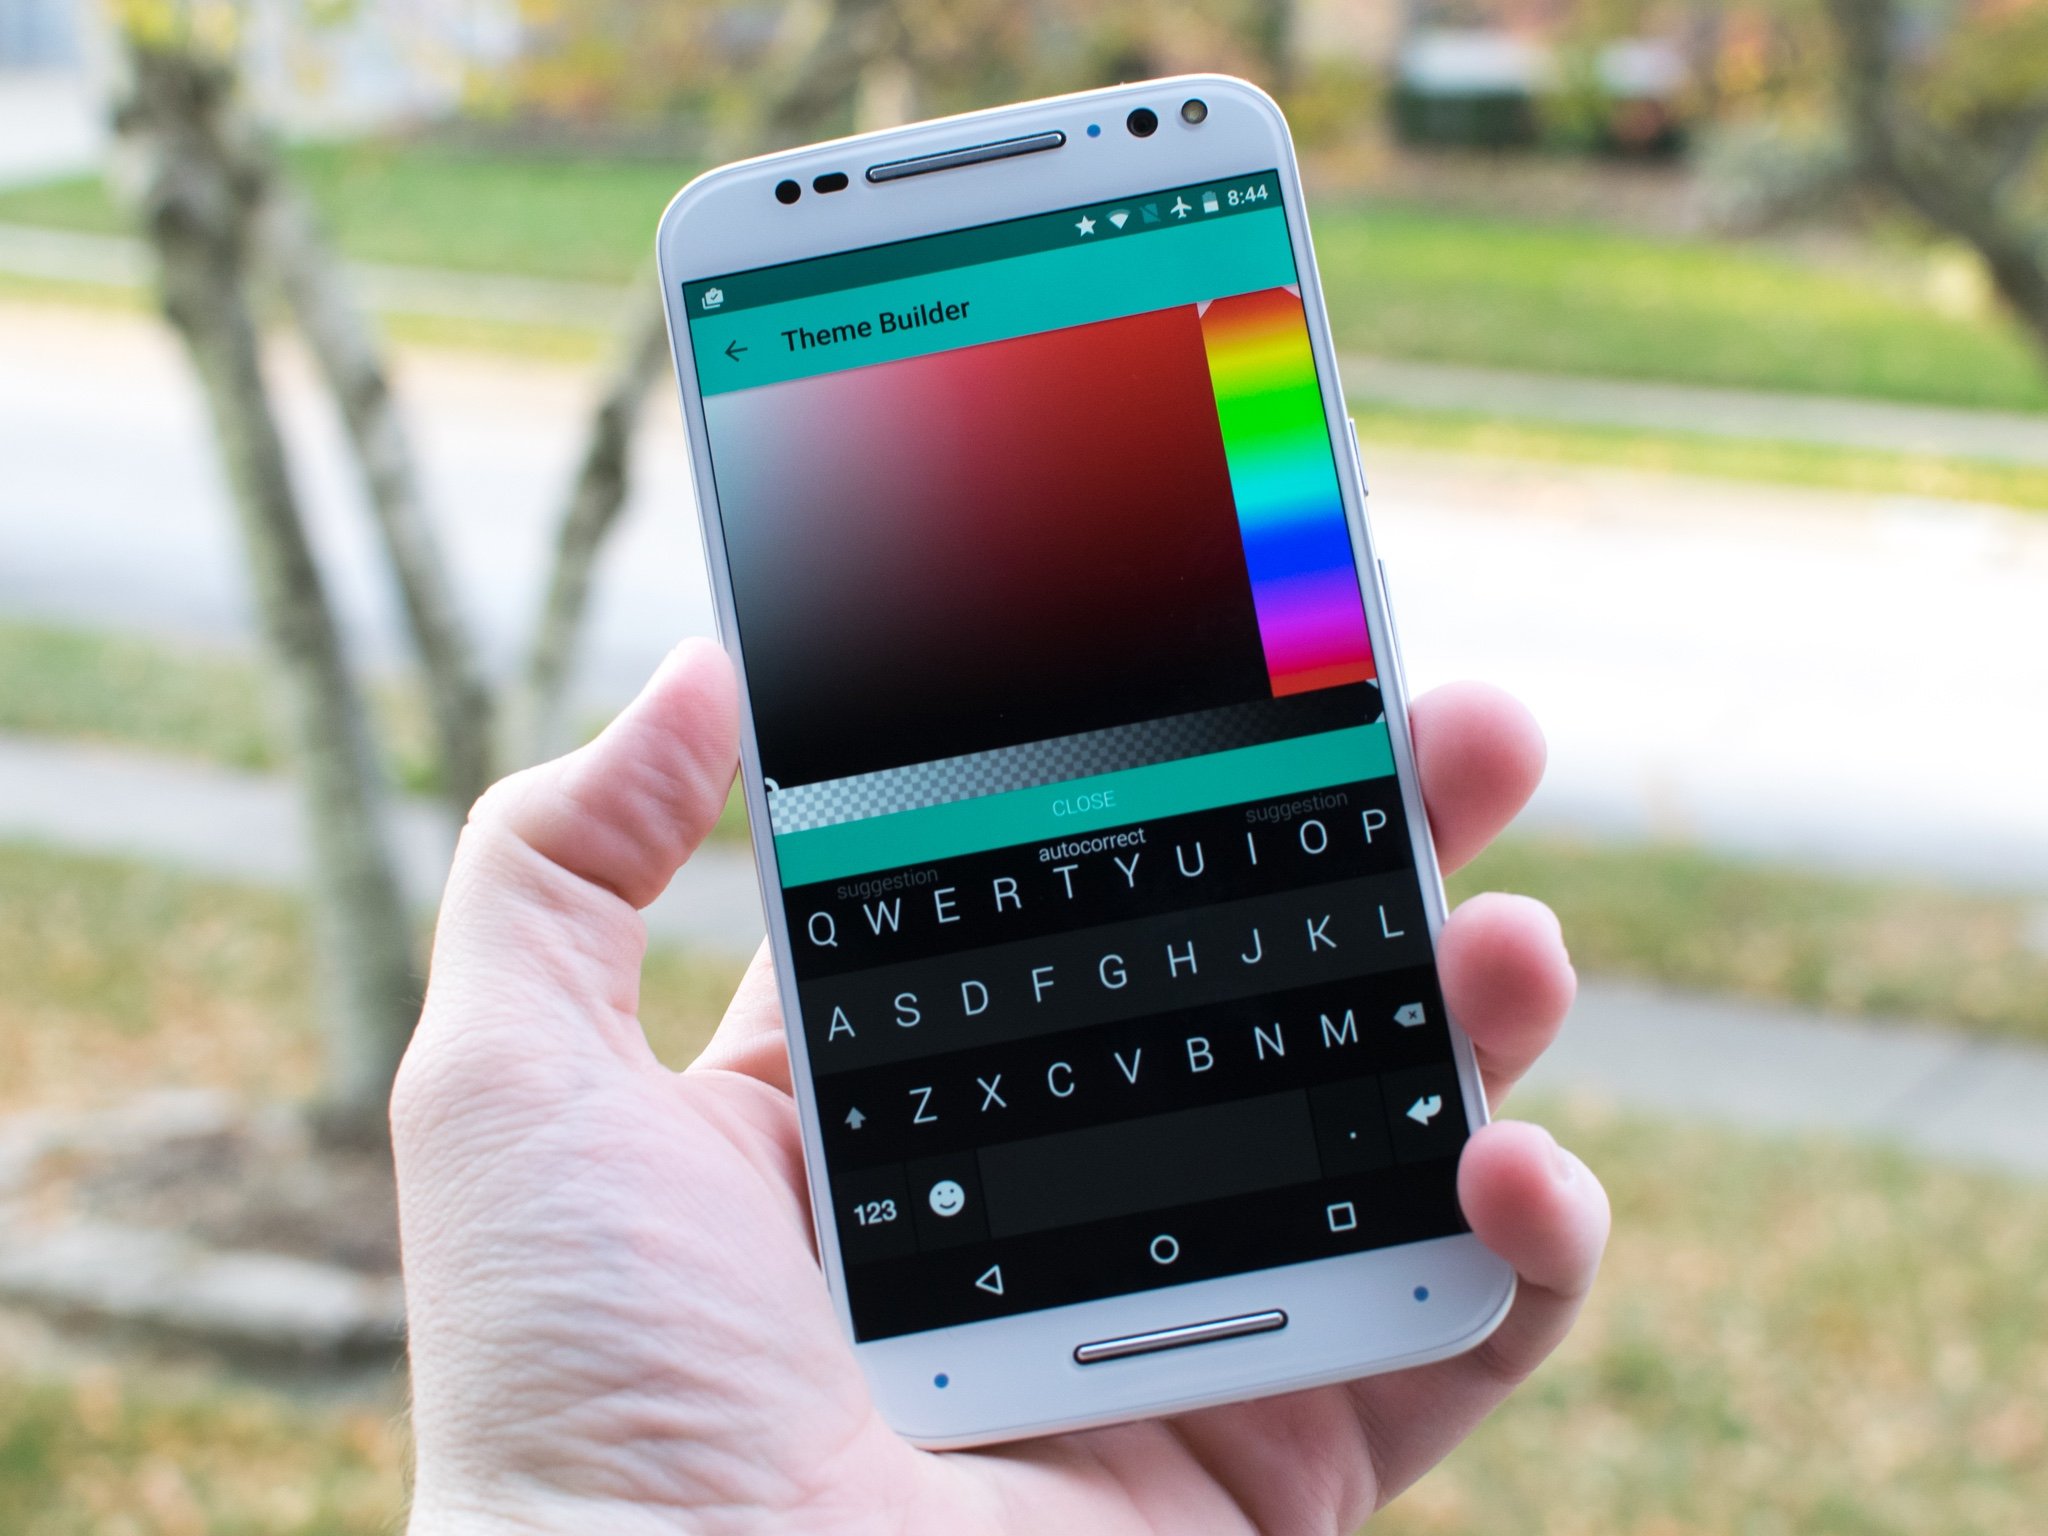 Fleksy gets even more personal with its new custom theme builder